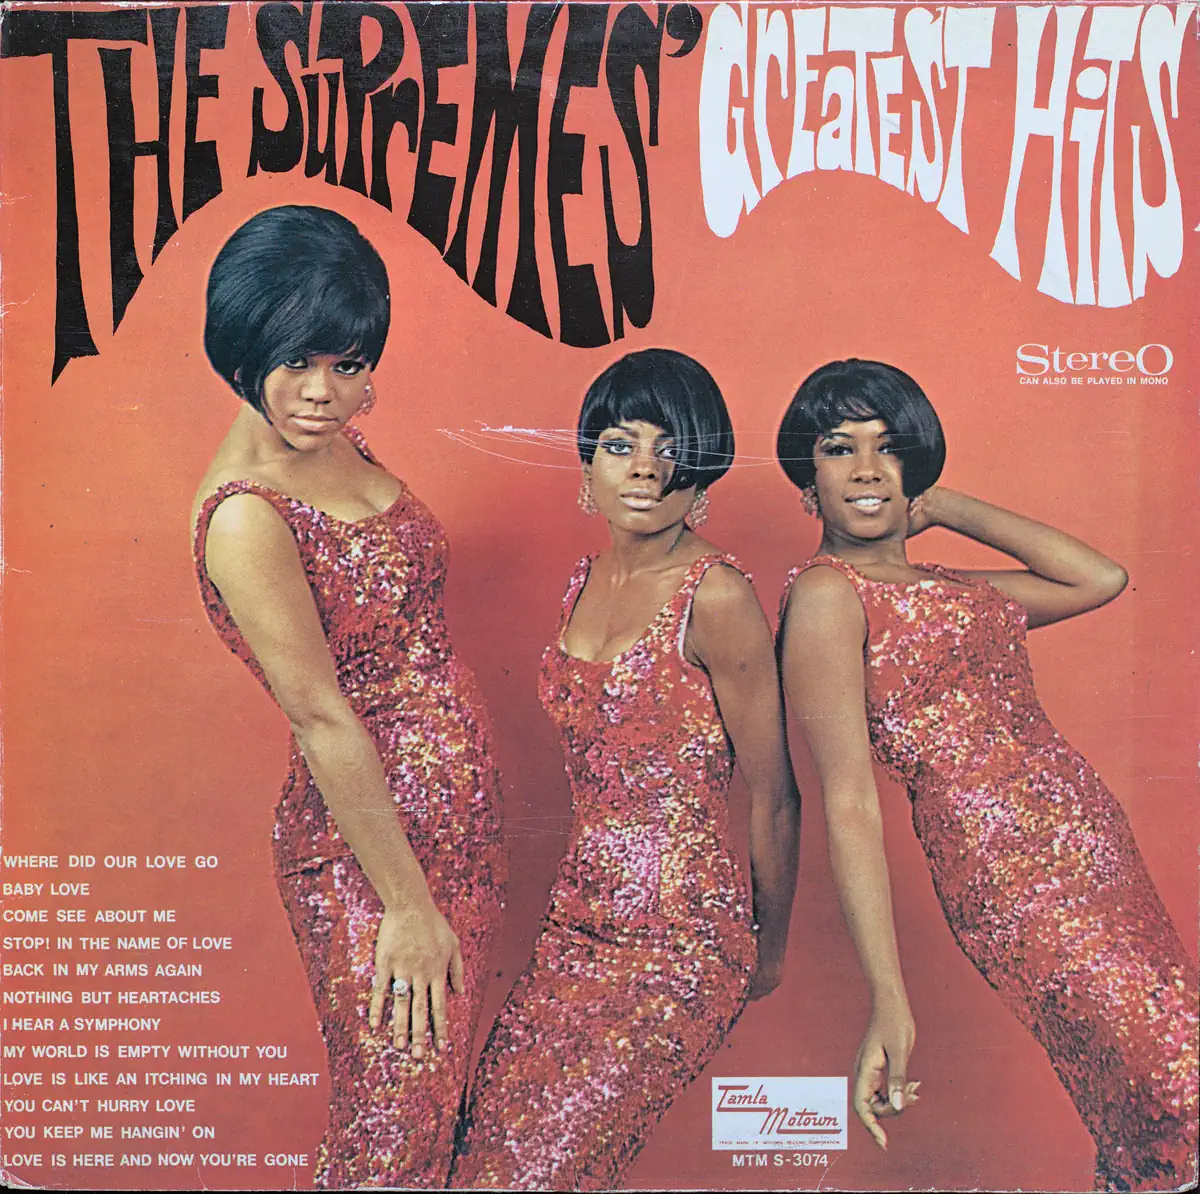 The Supremes - Greates Hits Album Cover